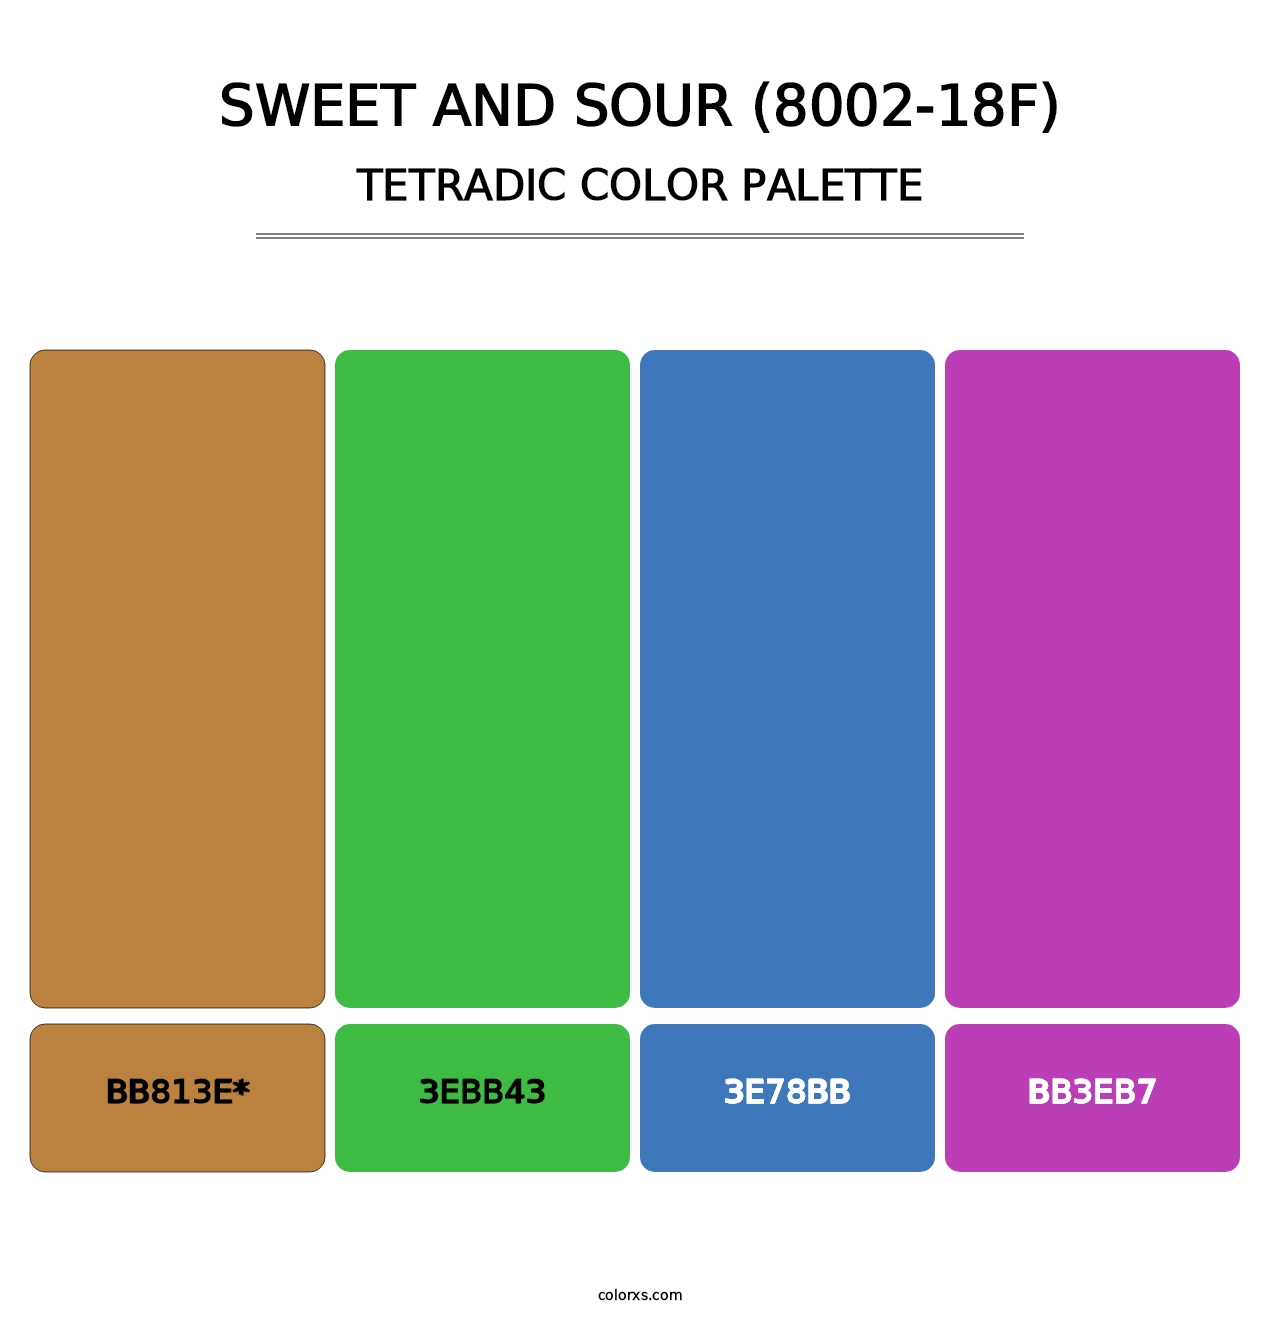 Sweet and Sour (8002-18F) - Tetradic Color Palette